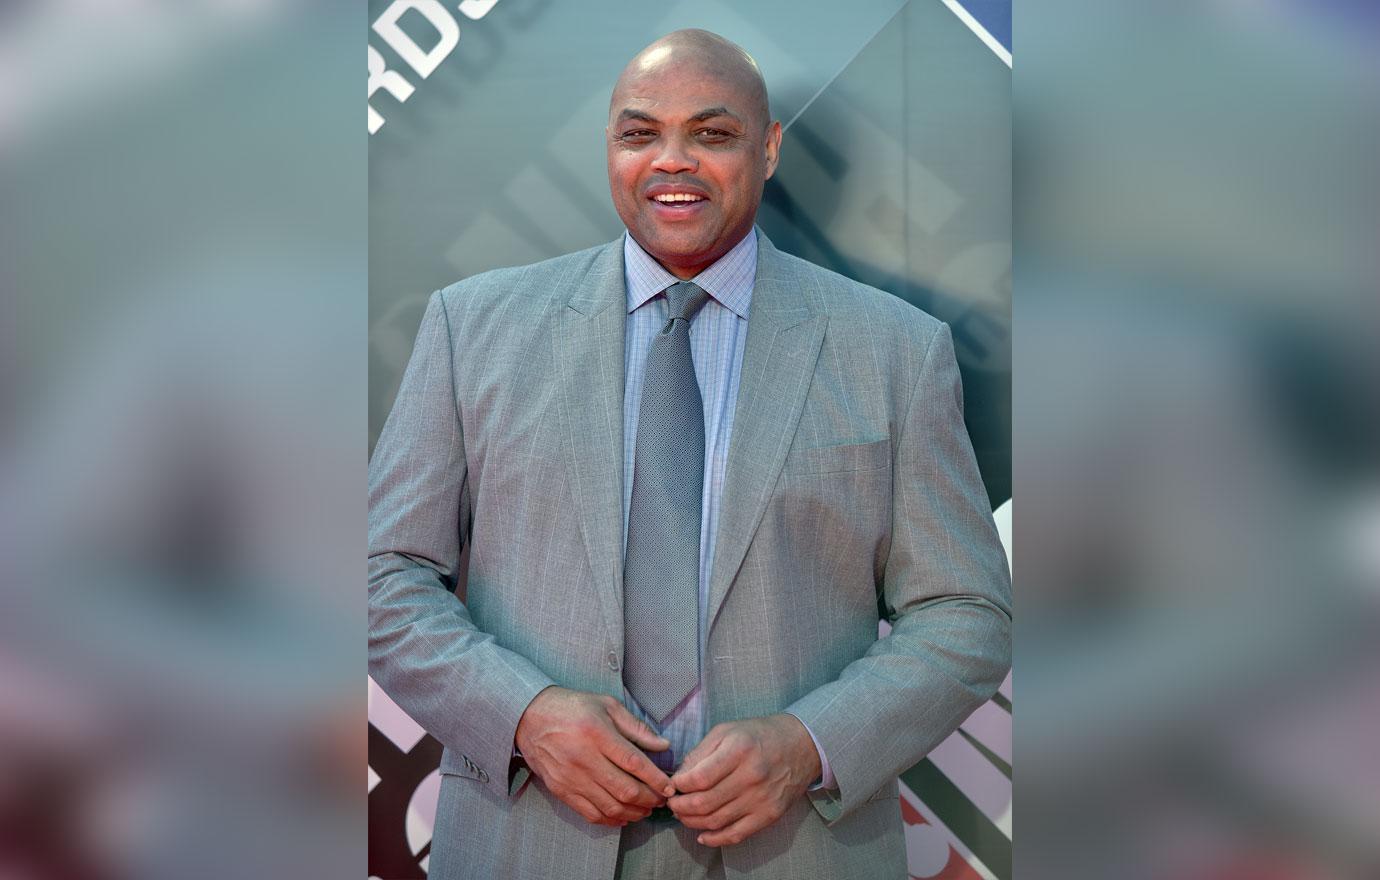 Charles Barkley contract: New 10-year, $100 million deal 'is life-altering'  - MarketWatch